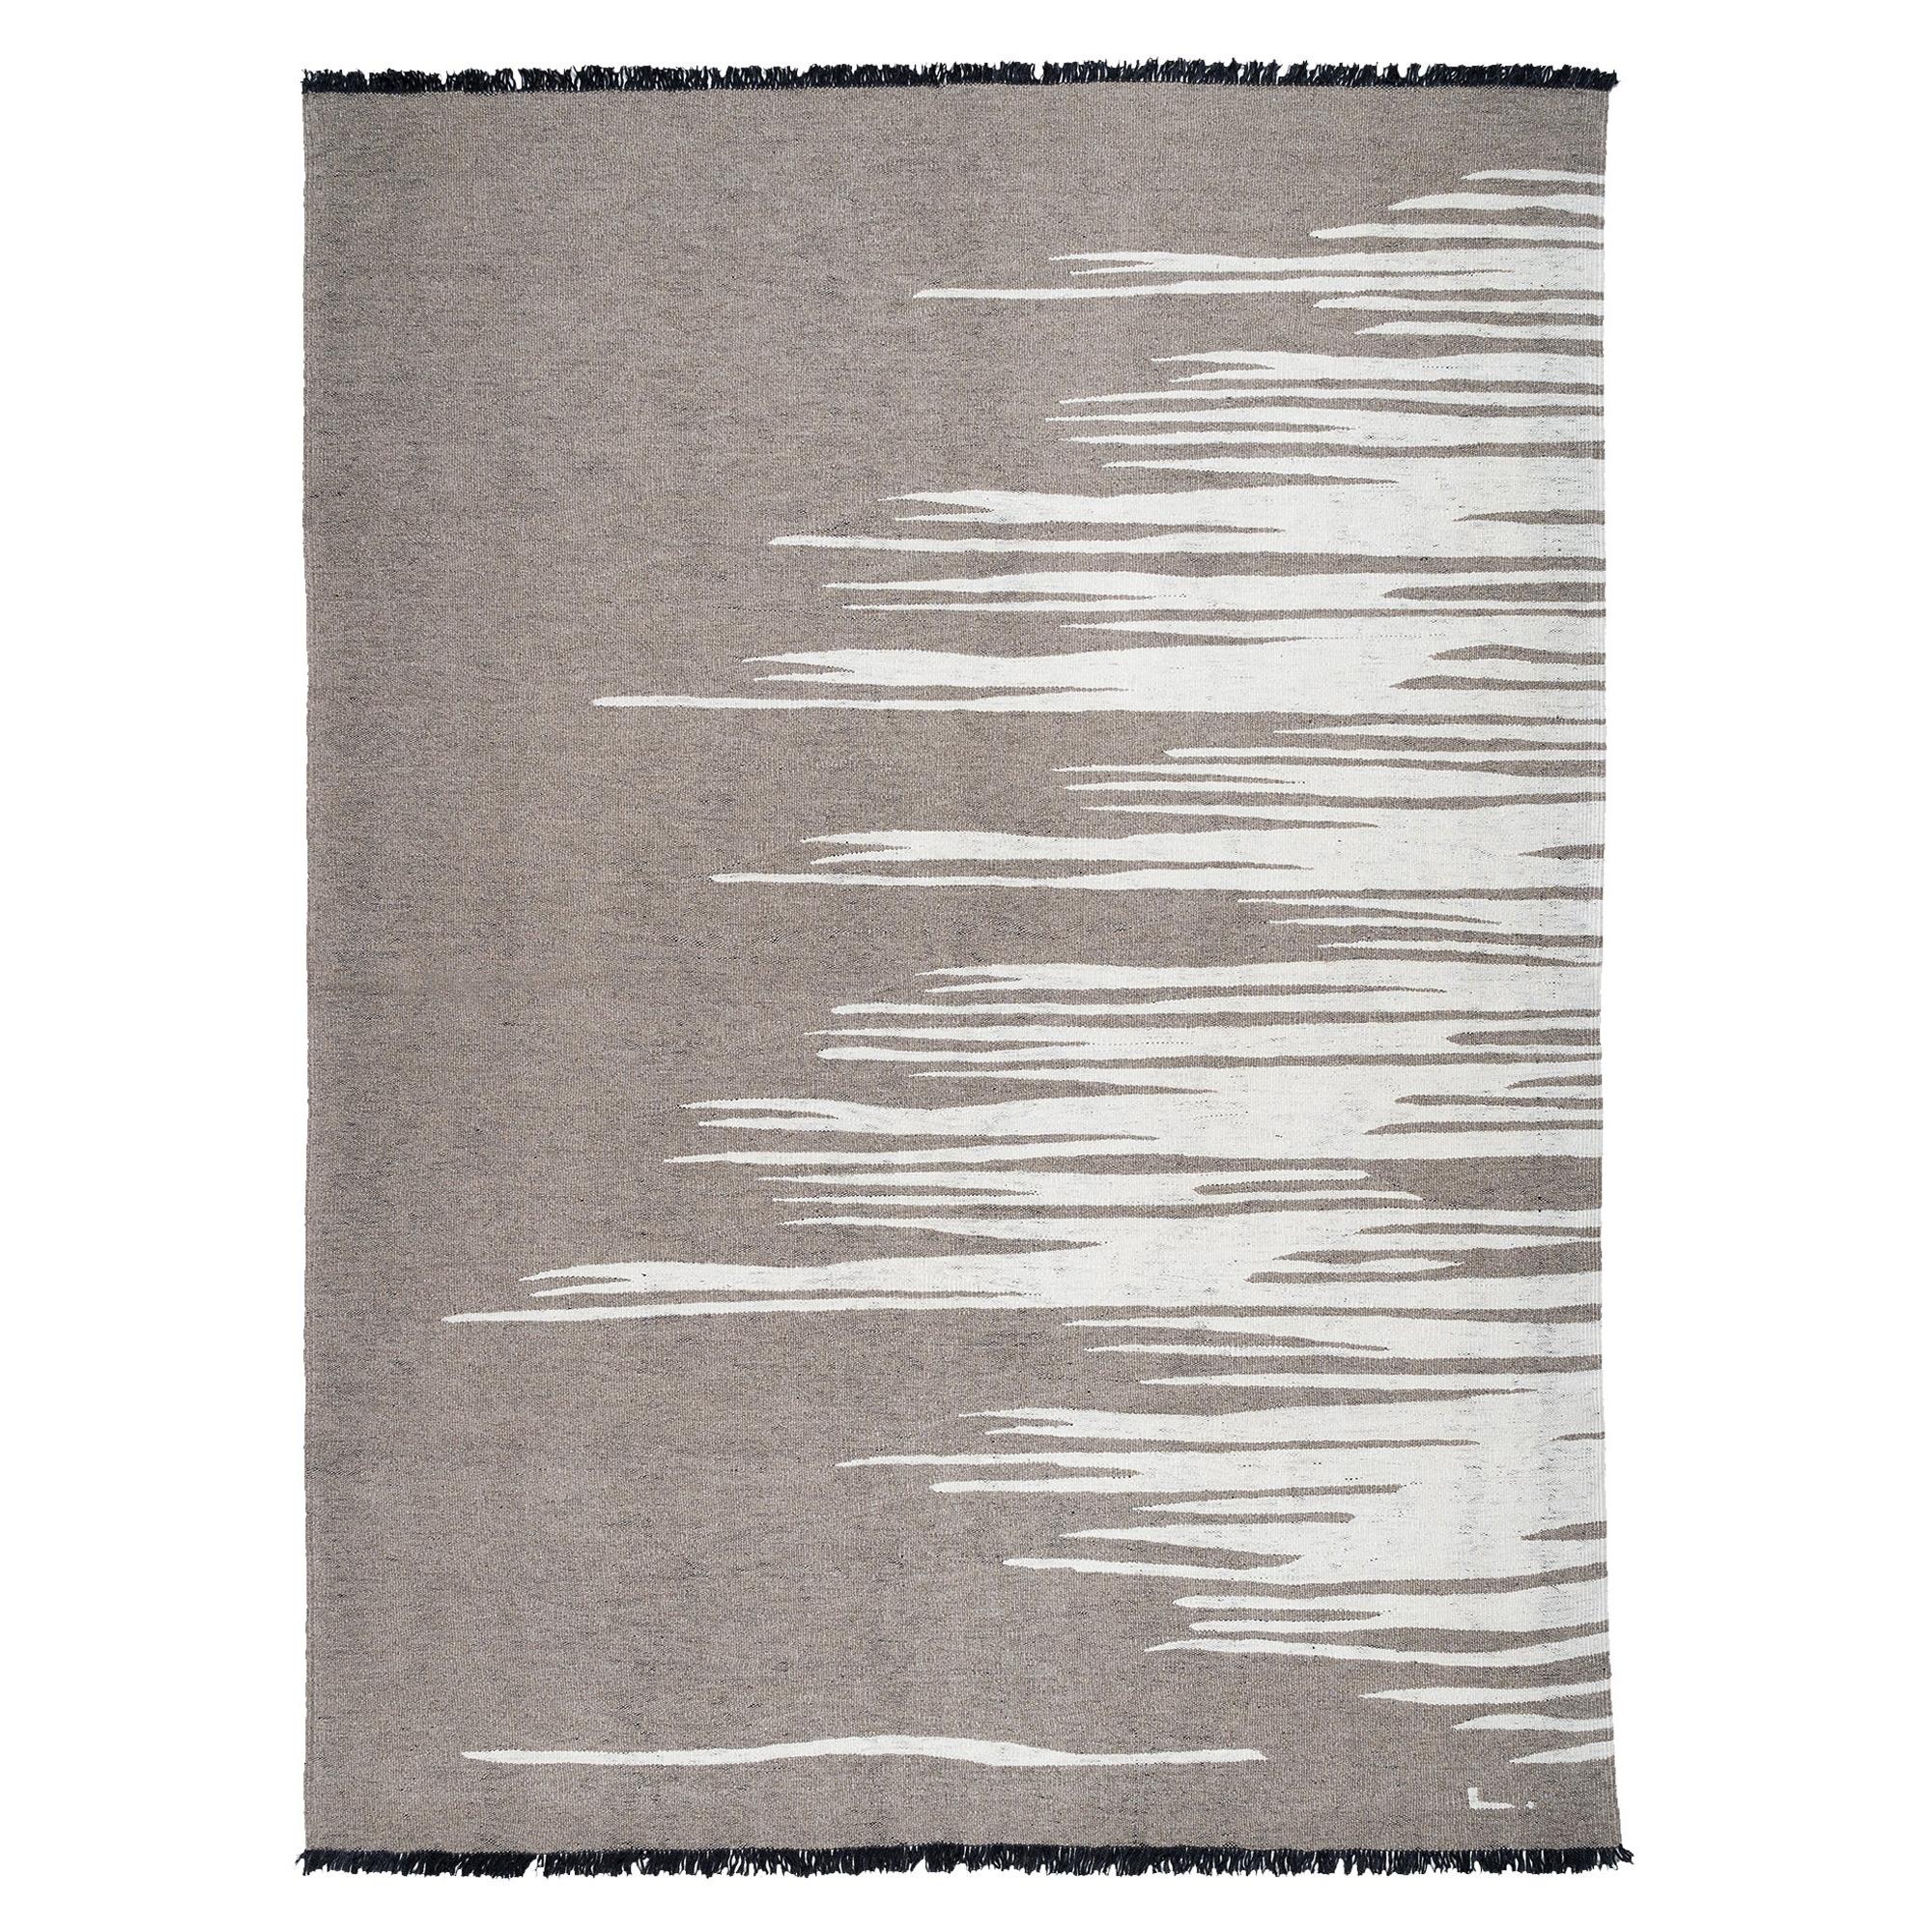 Ege No 3 Contemporary Kilim Rug Wool Handwoven Earthy Gray and Dune White For Sale